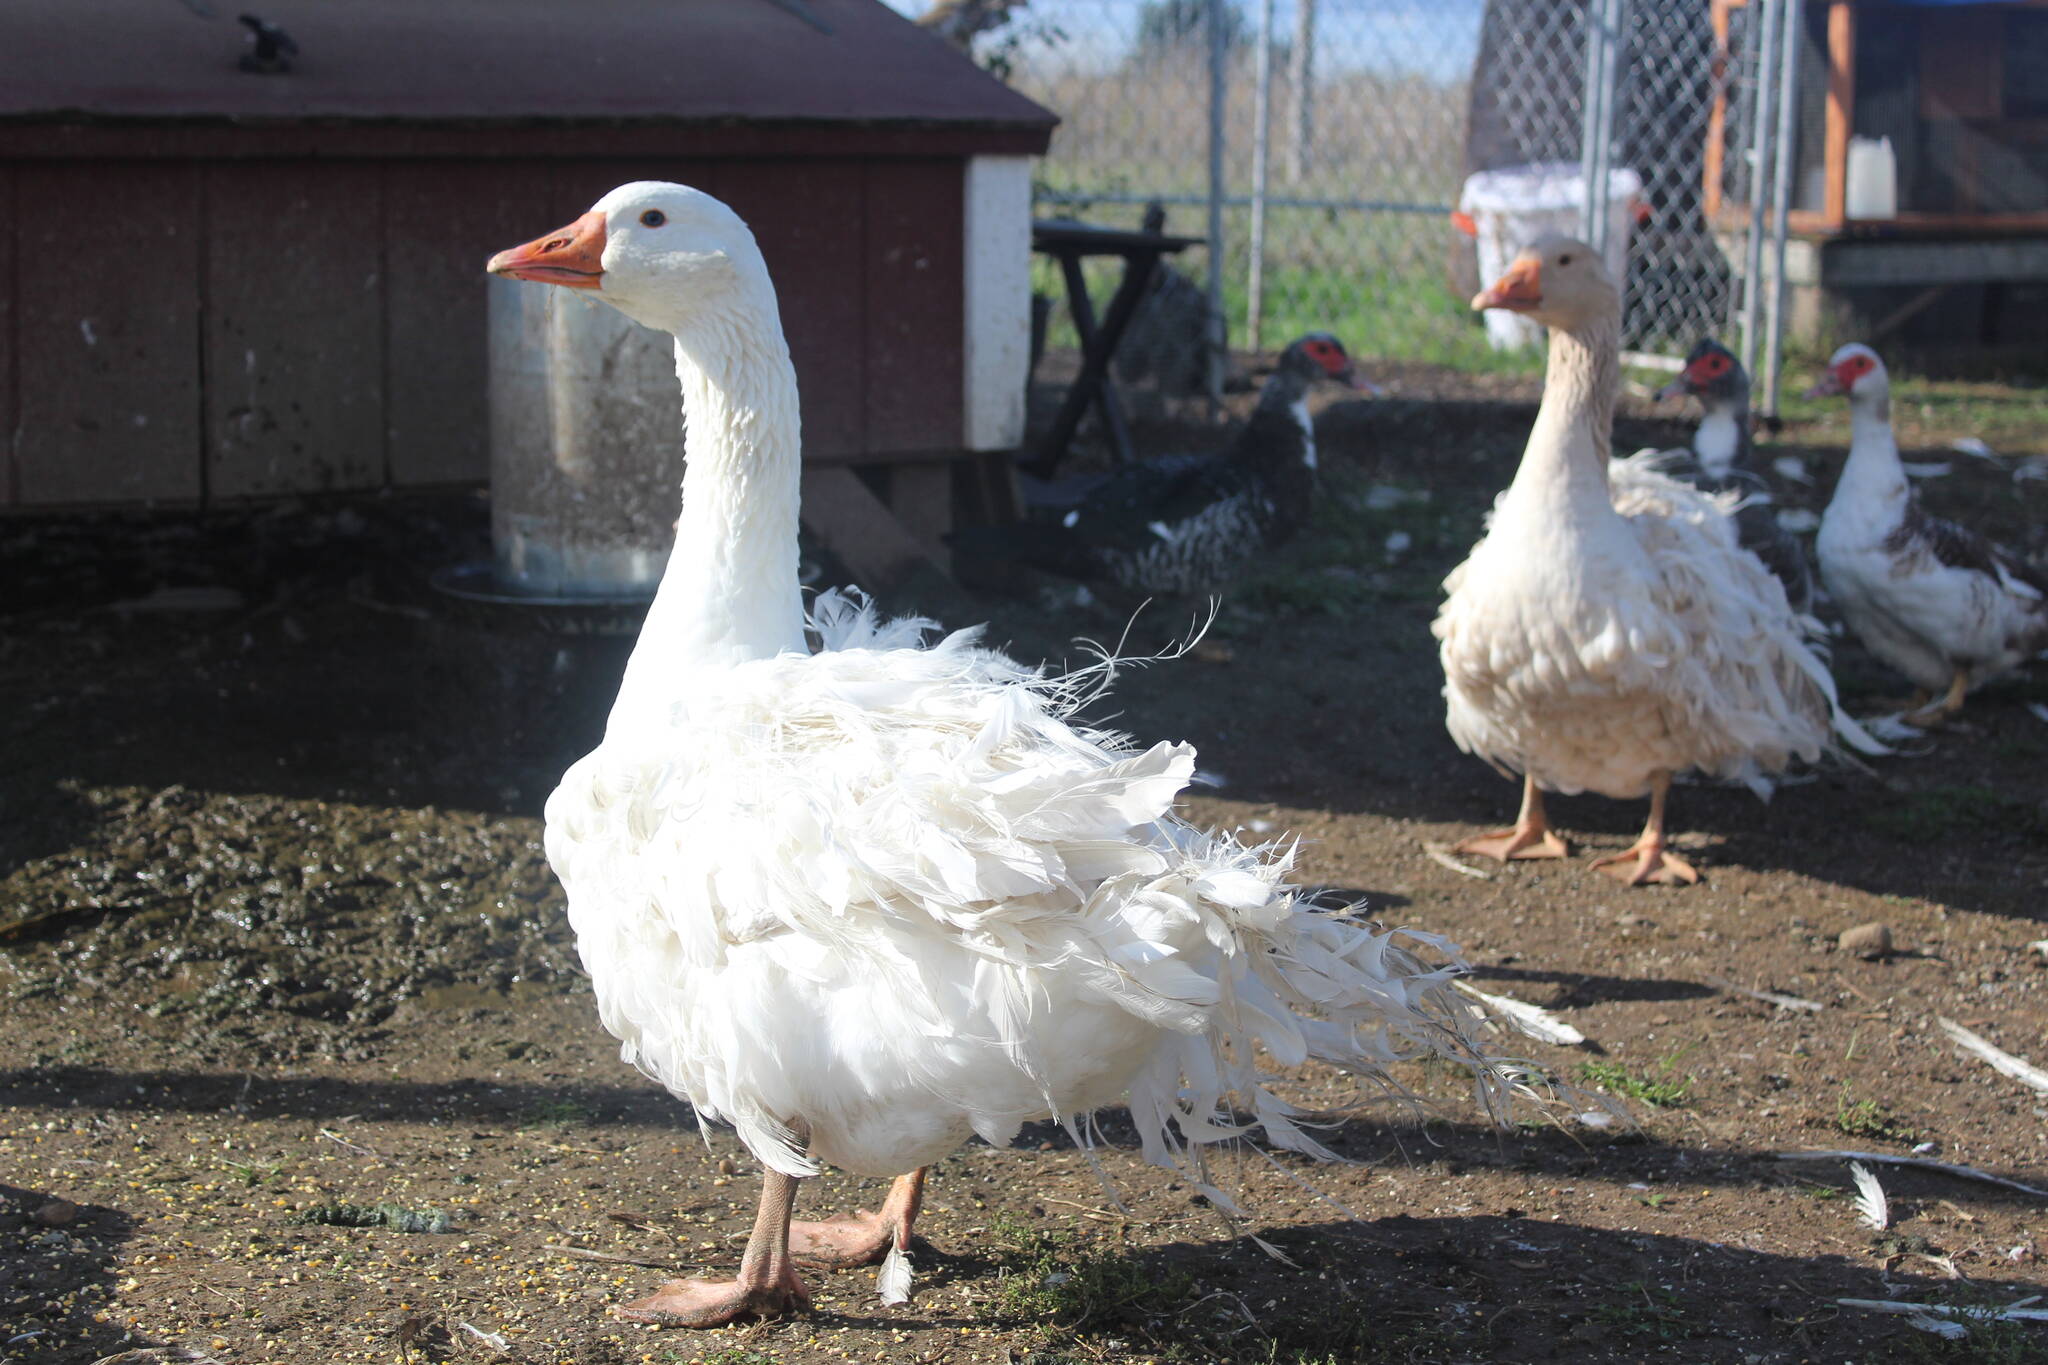 On a farm filled with retired show chickens, the most stunning birds are actually the two Sebastopol geese. Photo by Bailey Jo Josie/Sound Publishing.